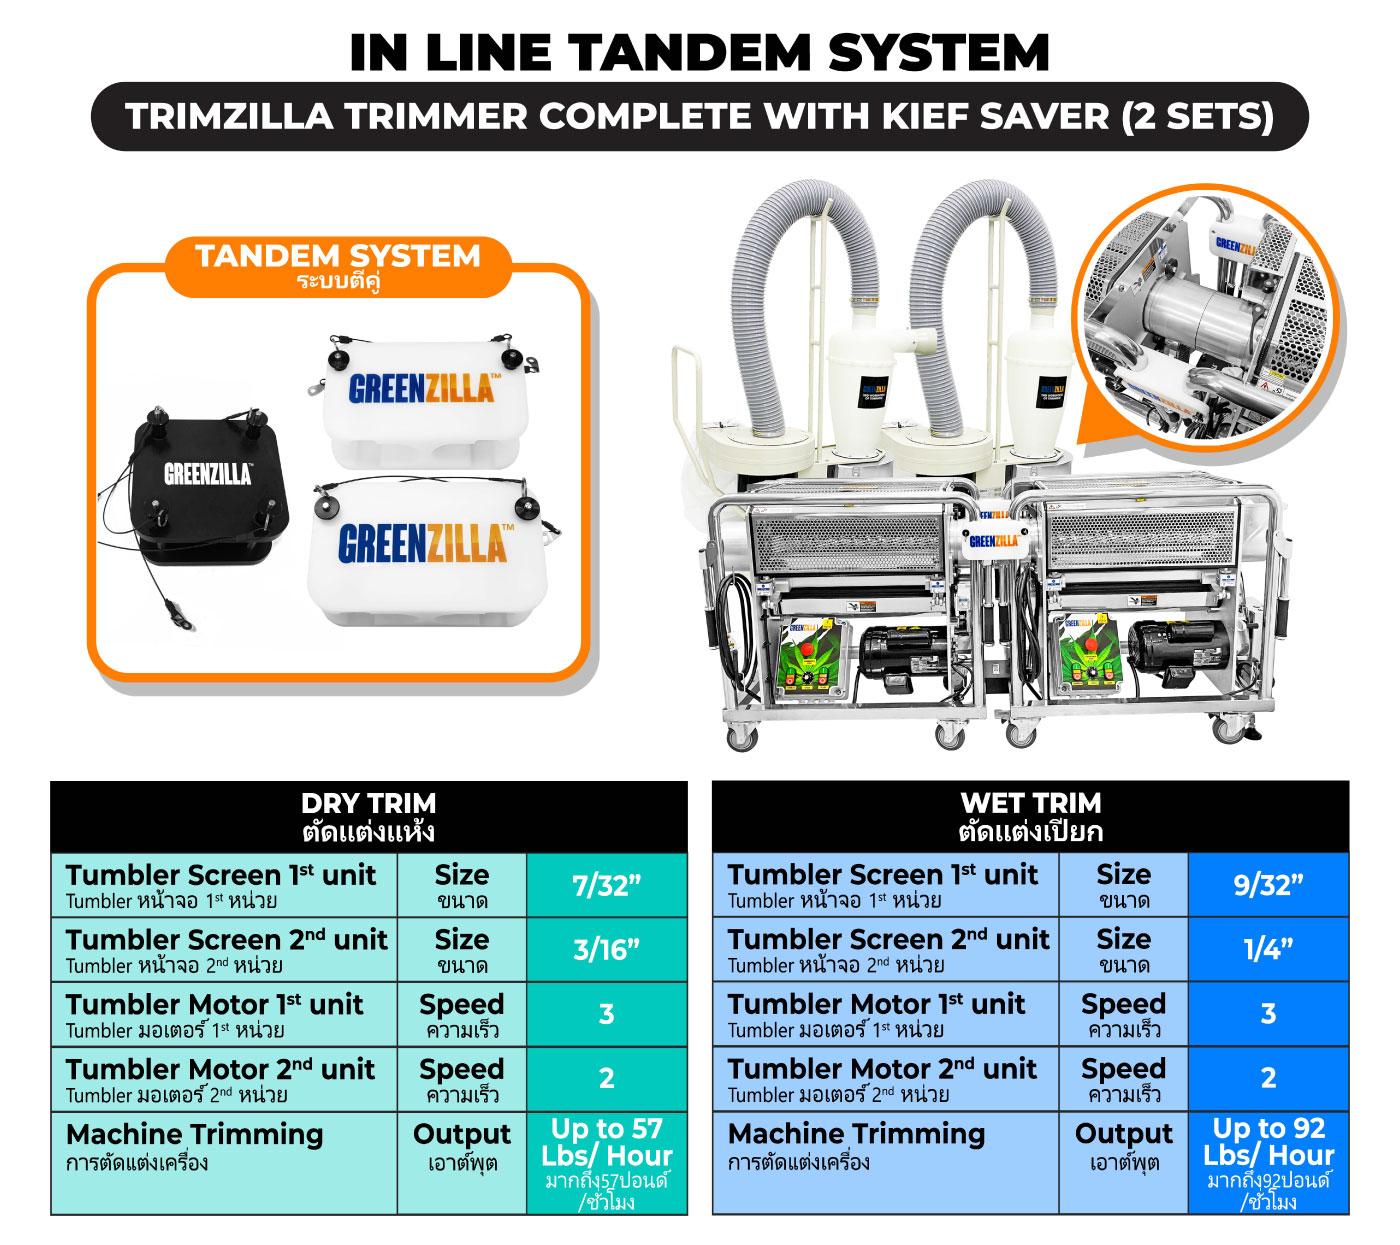 Recommendation for the In Line Tandem System - Trimzilla Trimmer Complete with Kief Saver